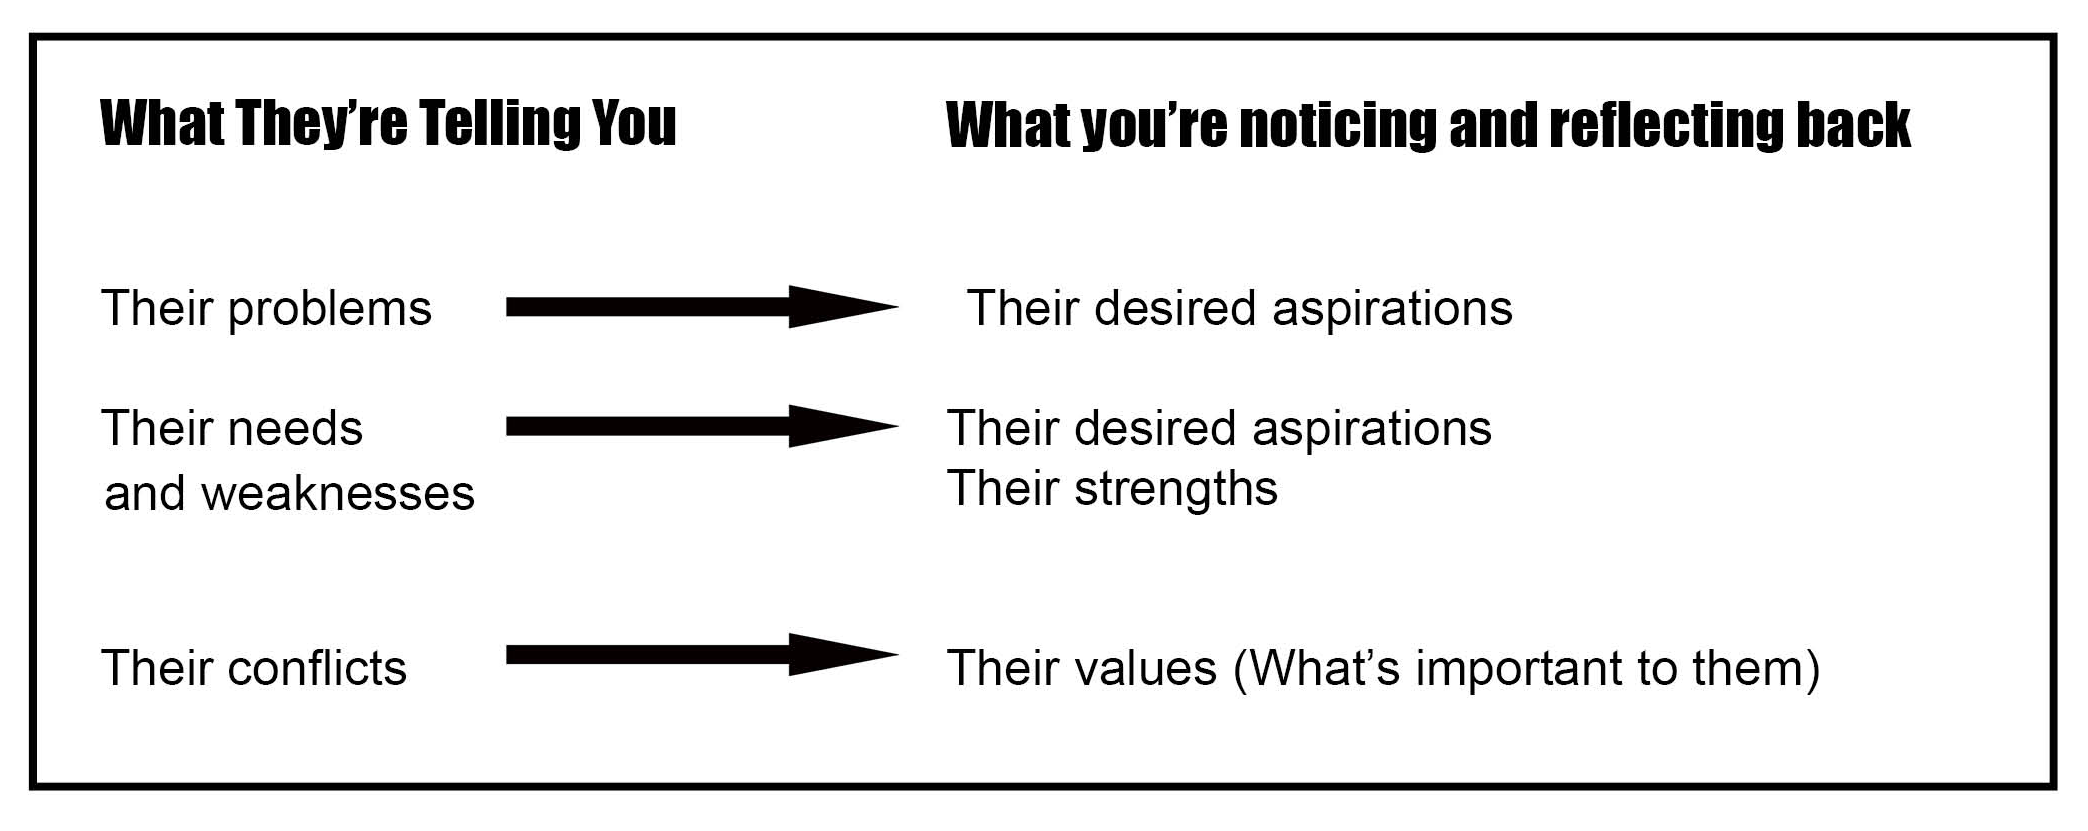 Chart comparing what people are talking about vs what we're listening for. When they tell us their problems, we can listen for their aspirations. When they are talking about weaknesses, we can listen for strengths. When they focus on conflicts, we can listen for their values.